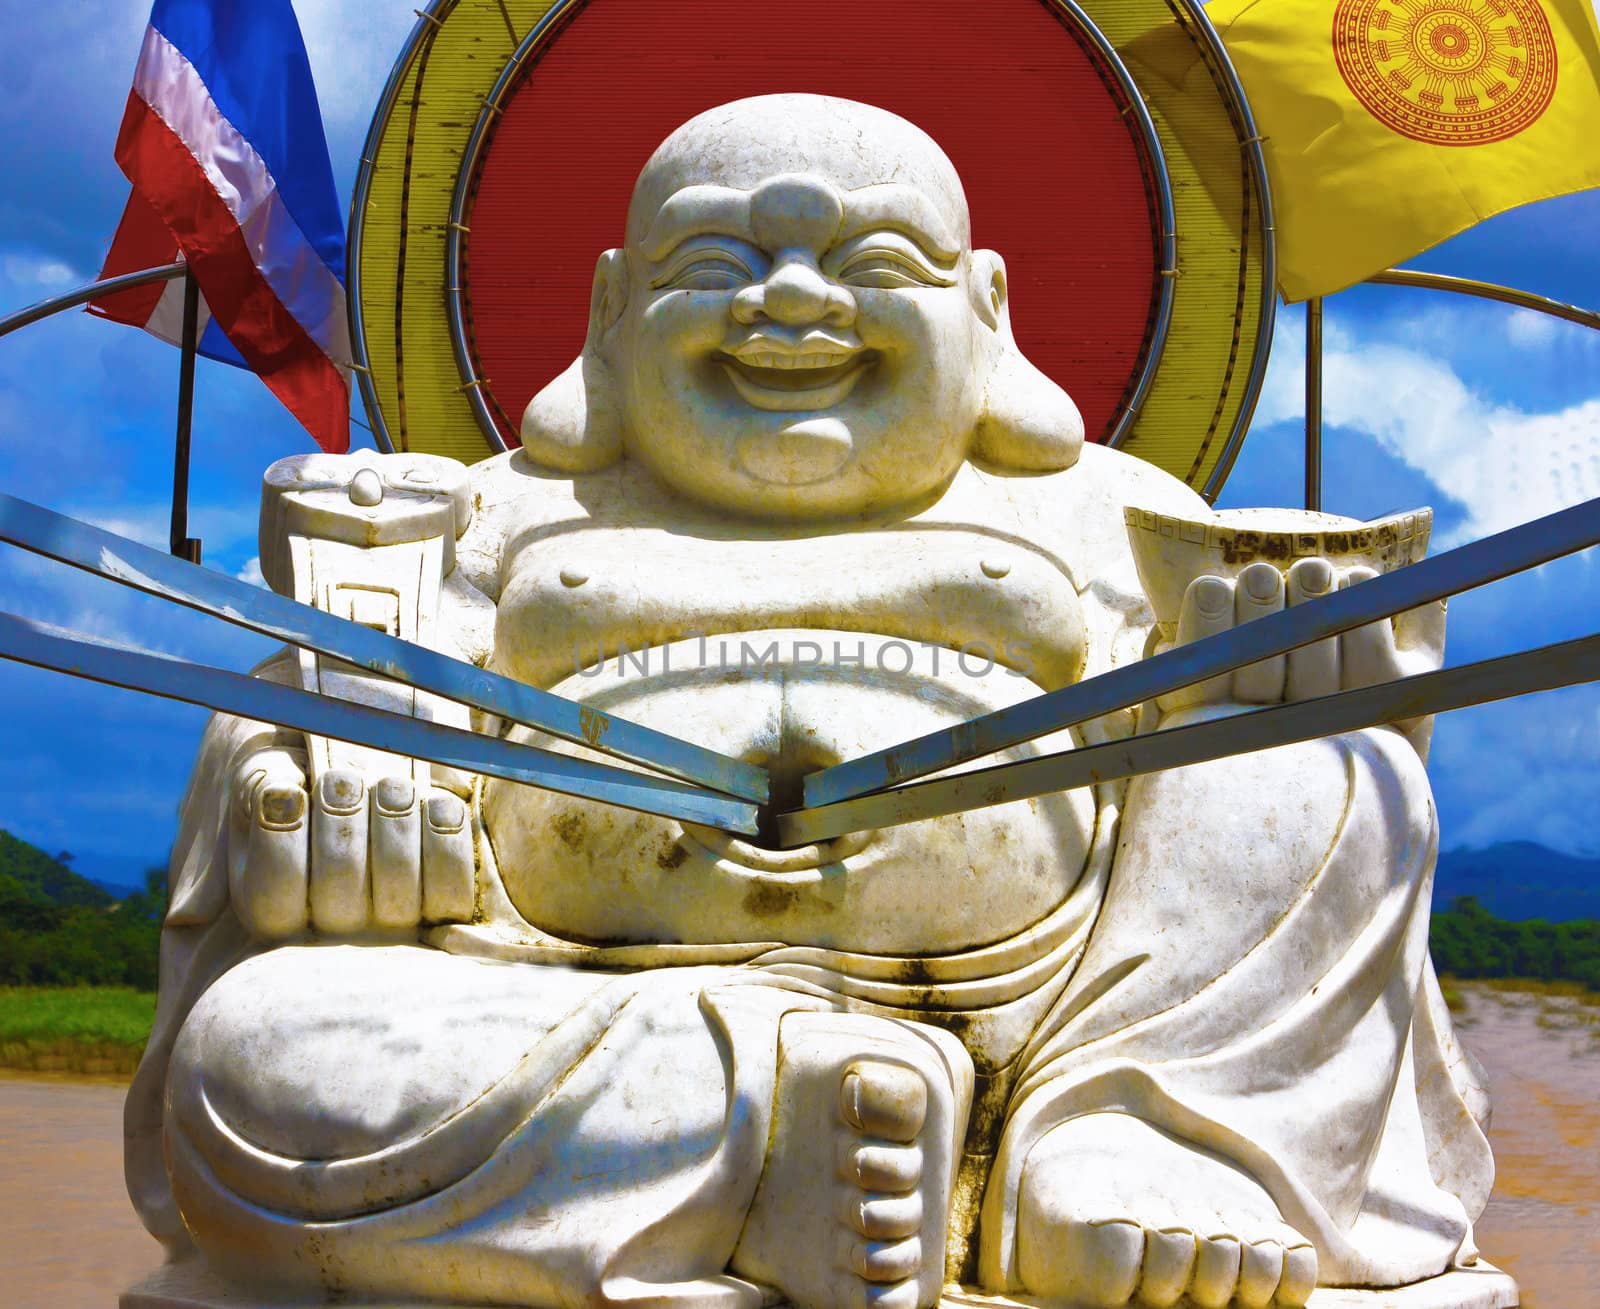 Fat Buddha statue allusions to the coin toss